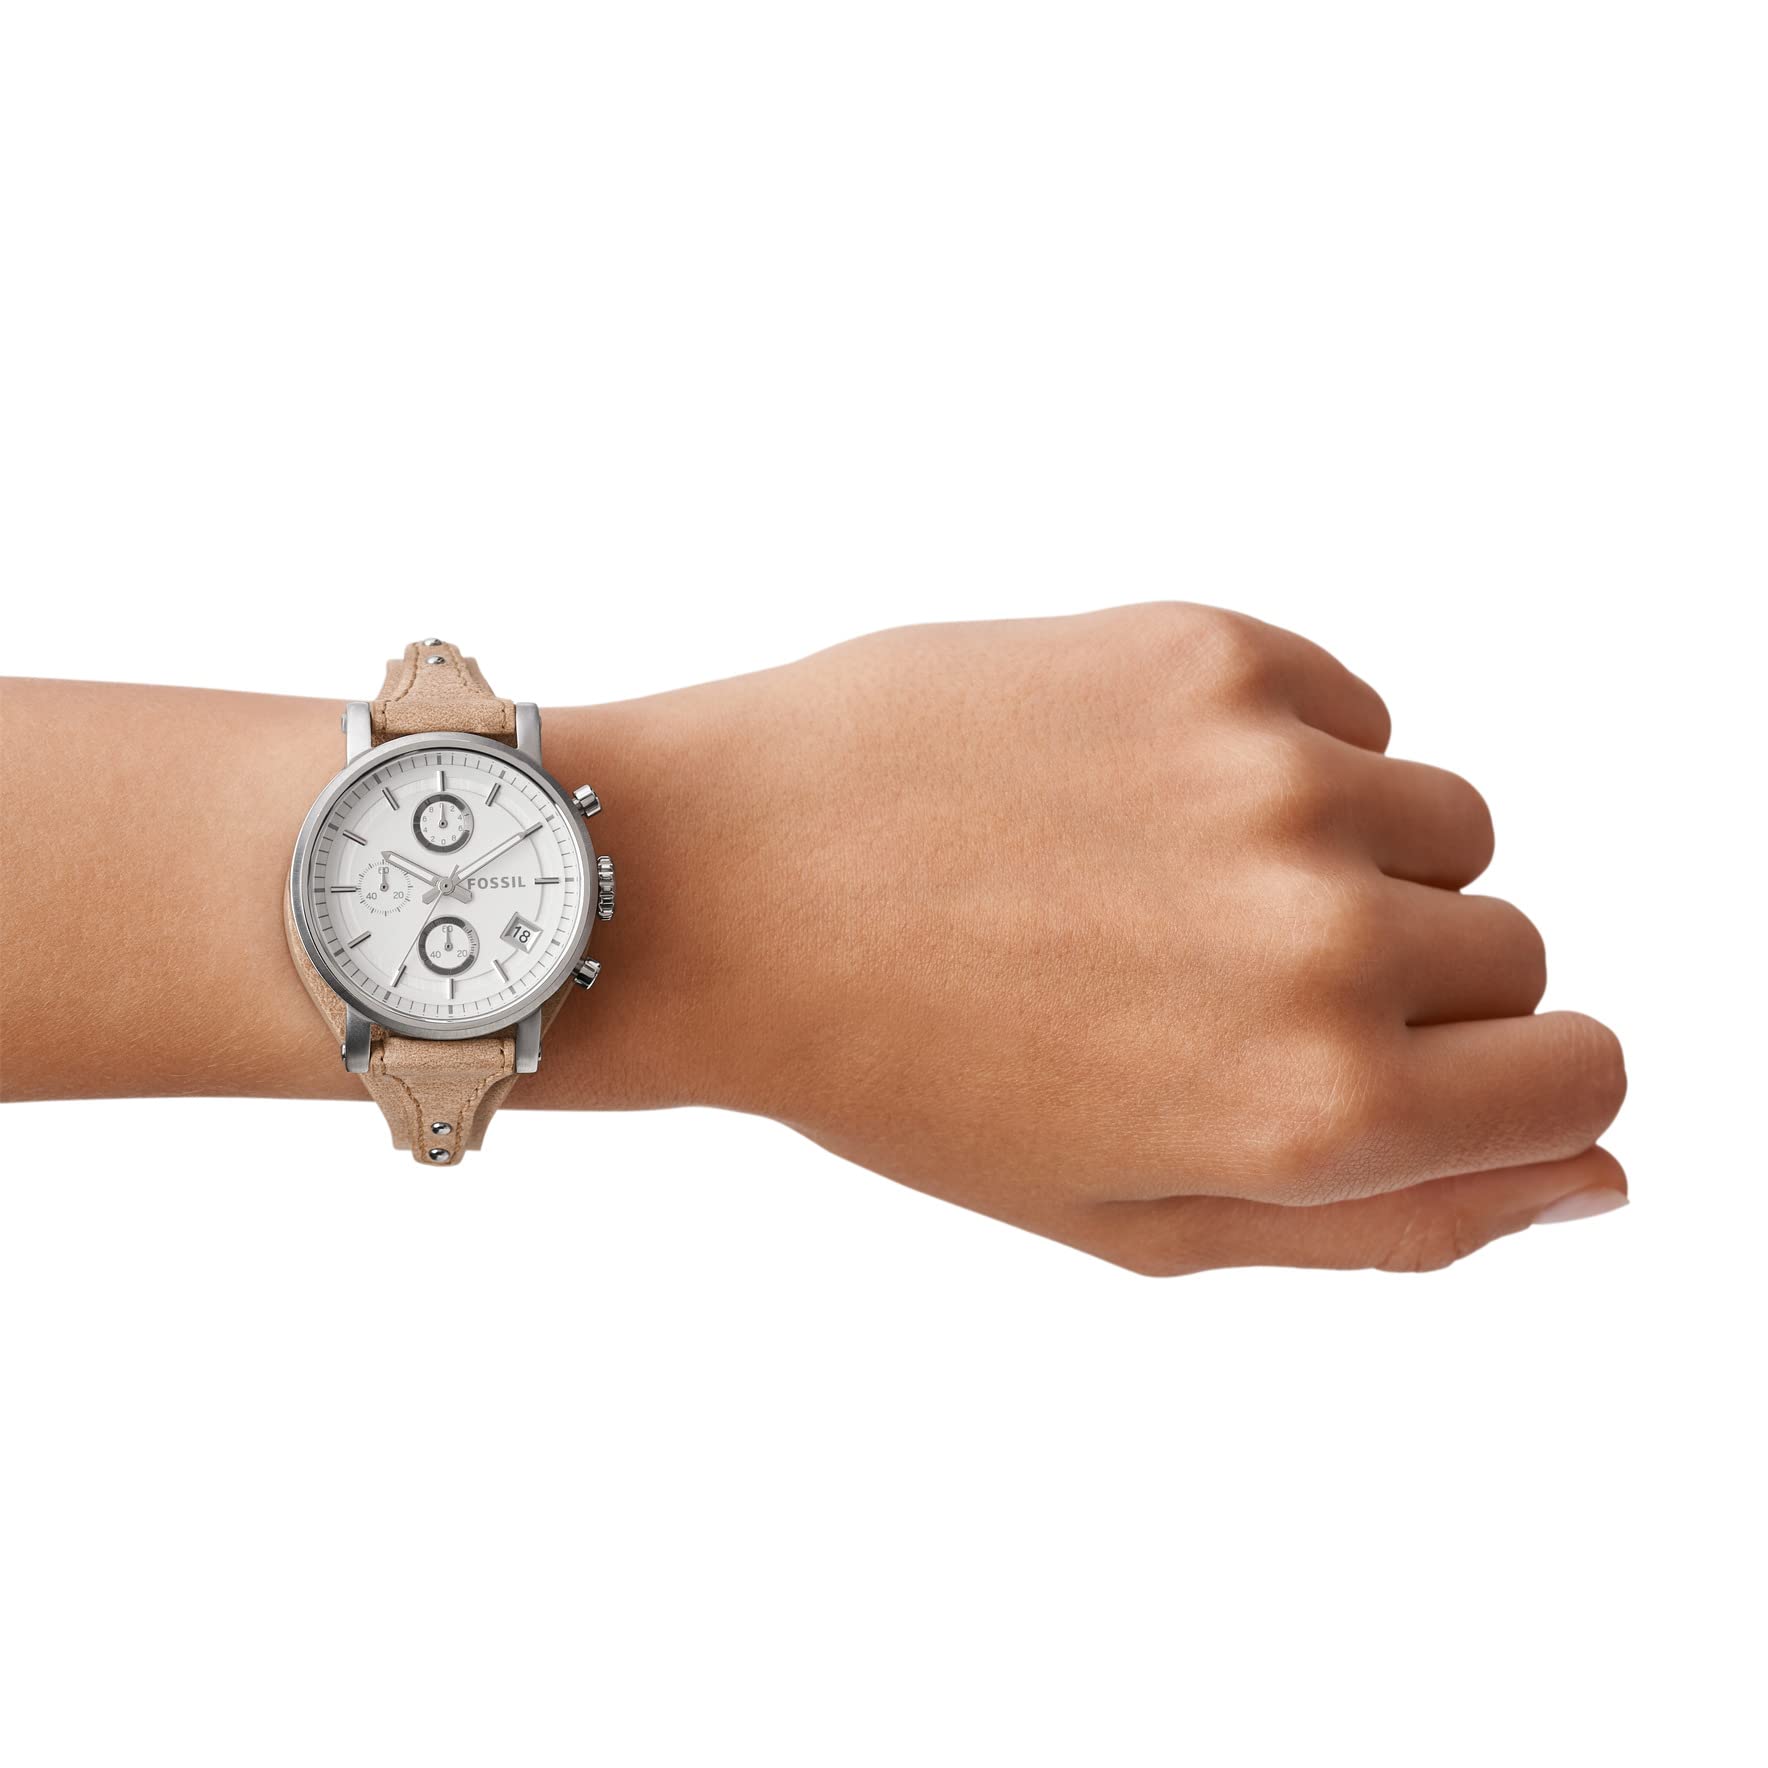 Fossil Original Boyfriend Women's Watch with Chronograph Display and Genuine Leather Cuff Band